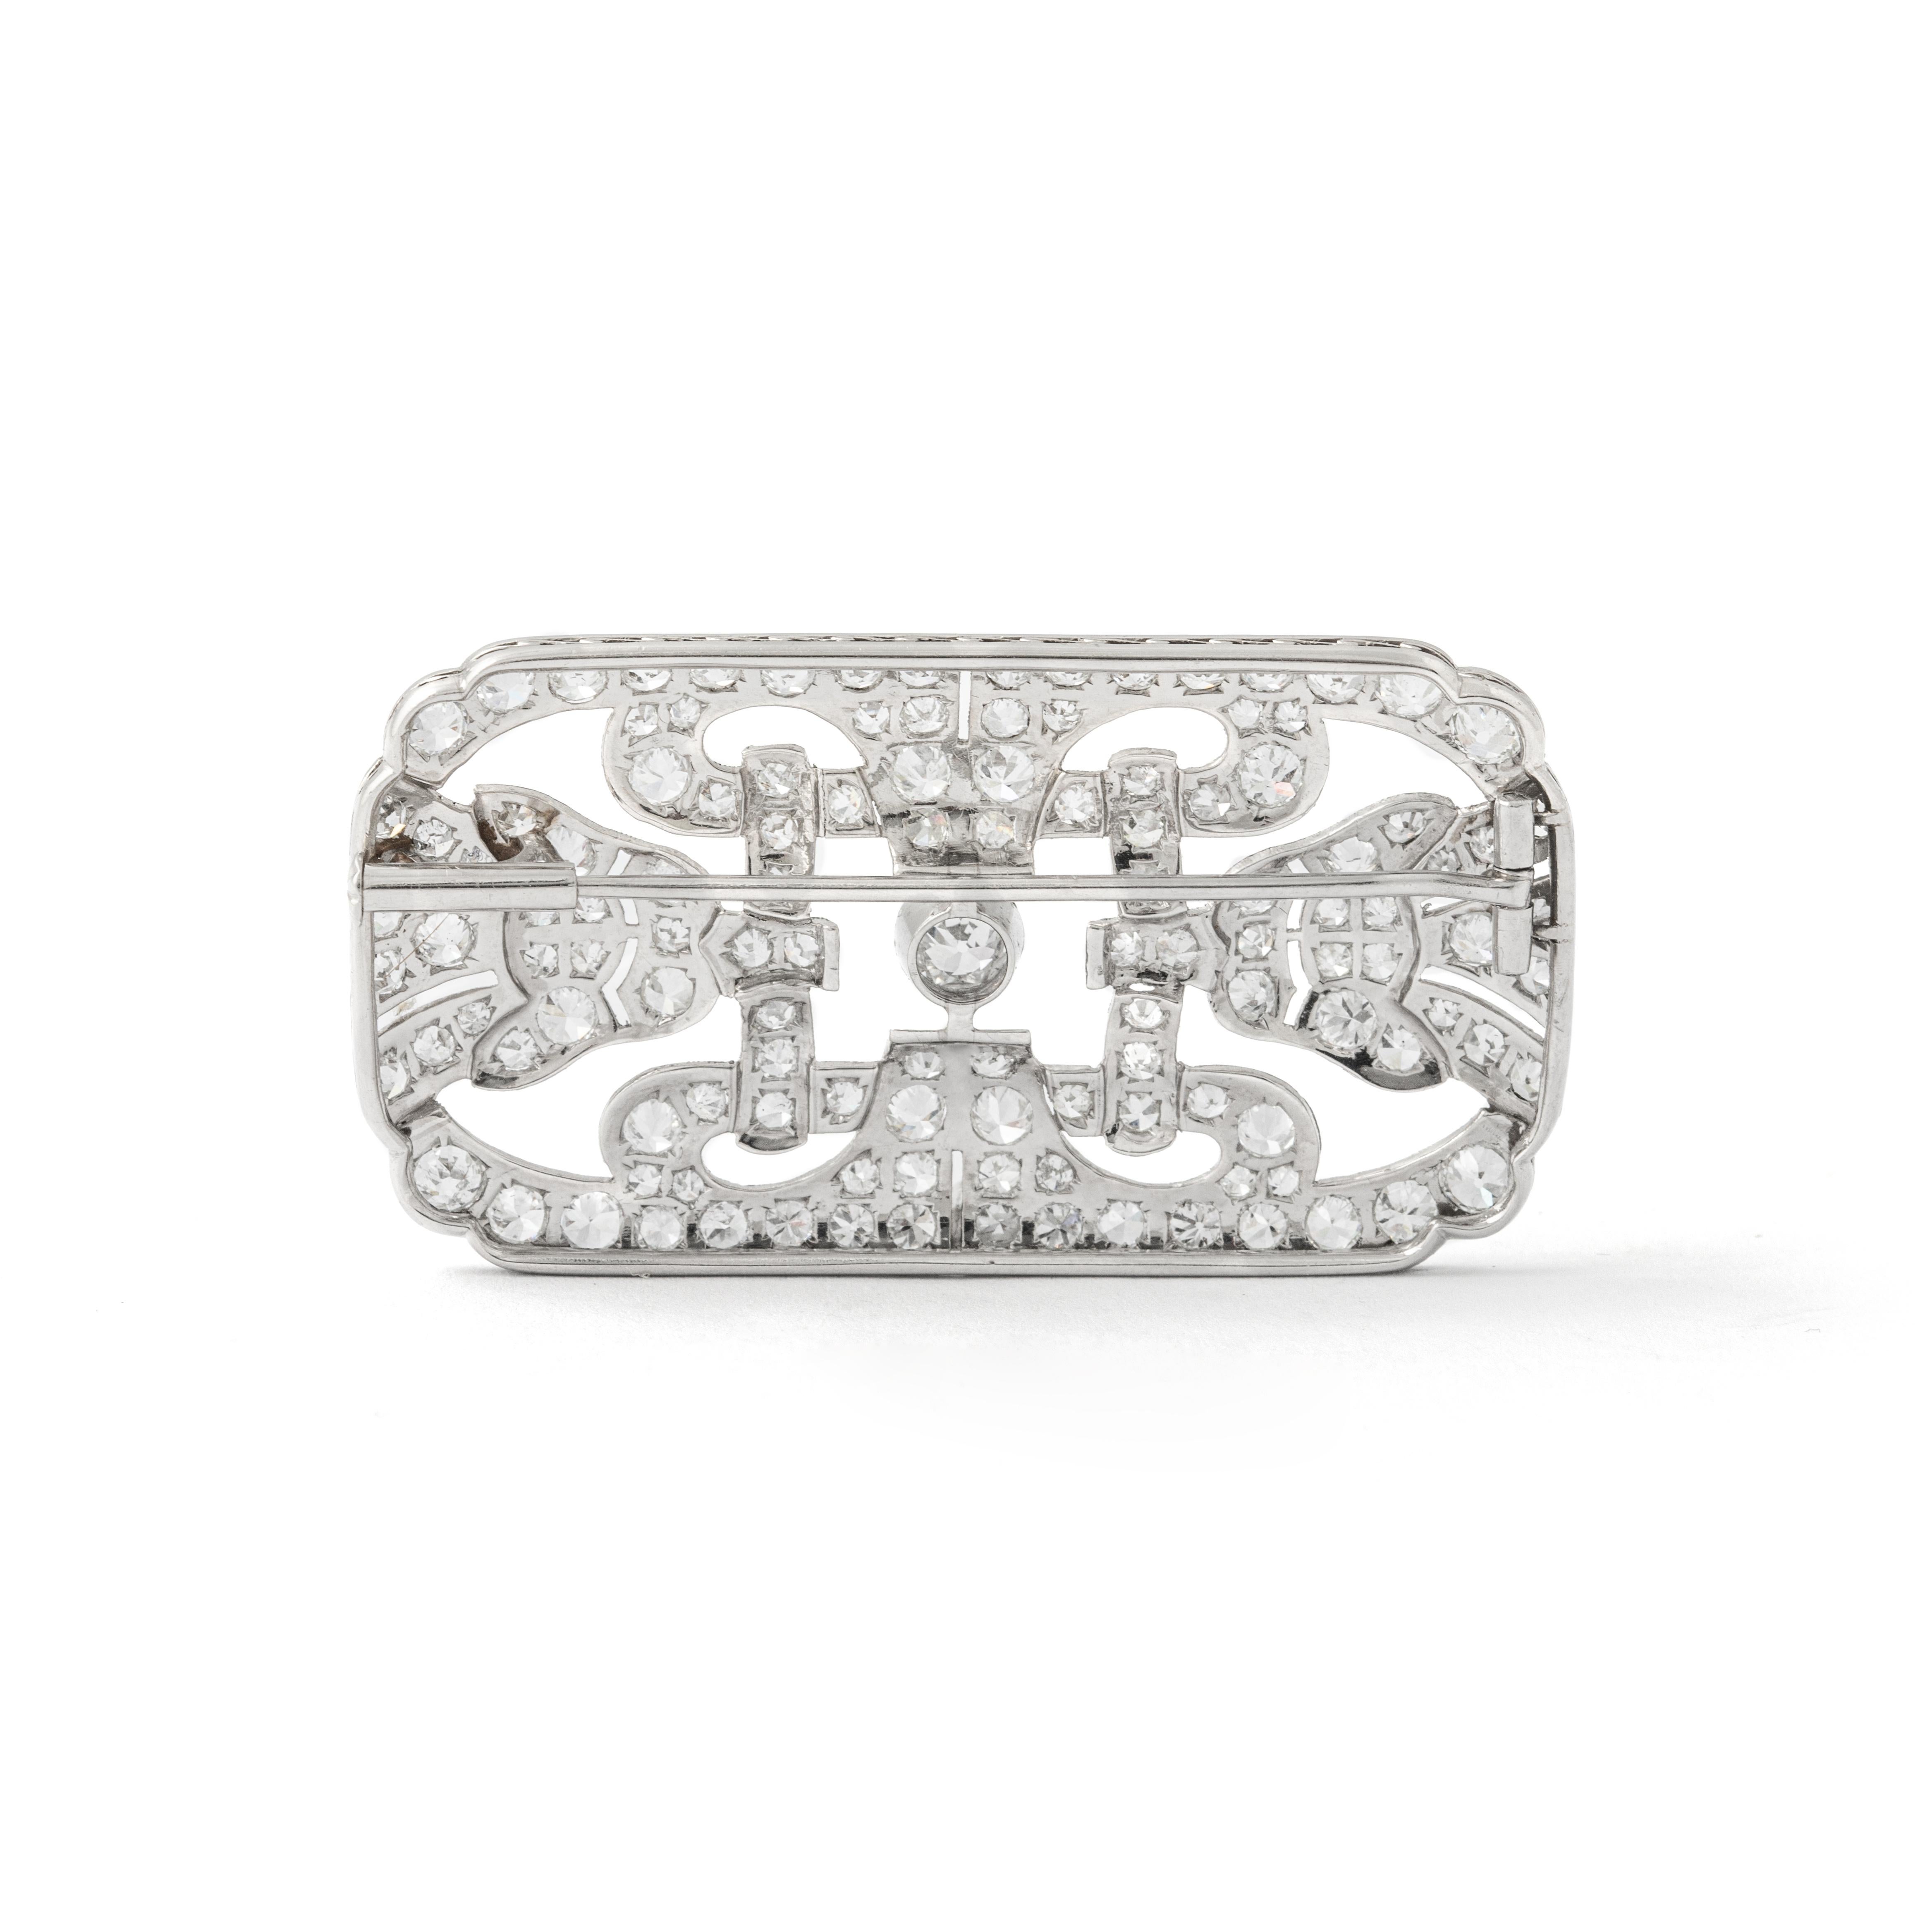 Art Deco Diamond Brooch.
Circa 1930.

Total length: approx. 5.00 centimeters / 1.97 inches.
Total width: approx. 2.80 centimeters / 1.10 inches.

Total weight: 13.18 grams.
